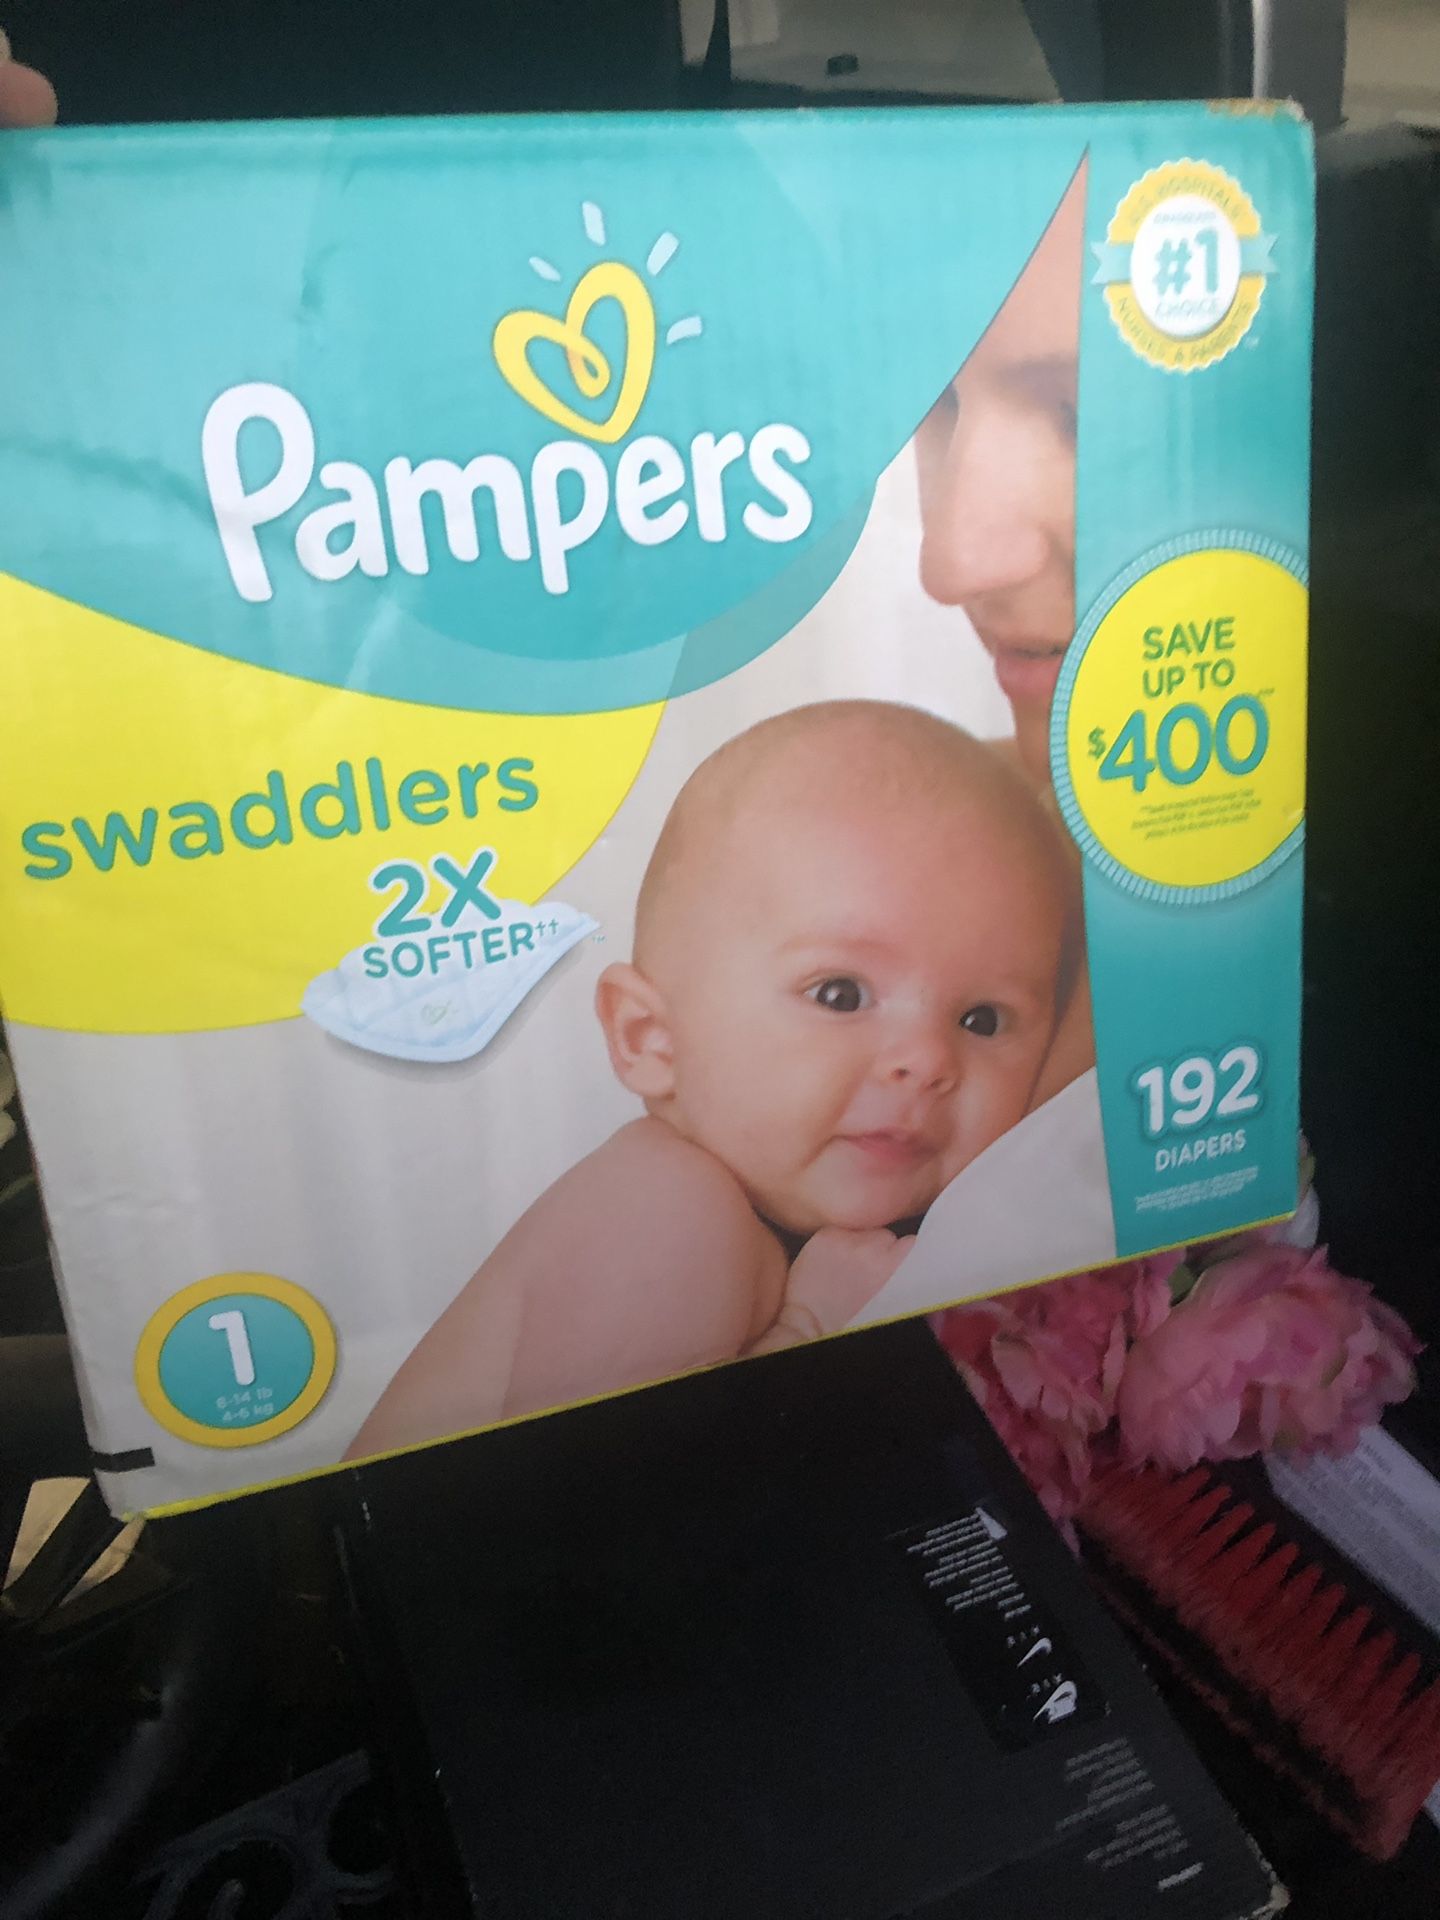 Brand new size 1 pampers diapers